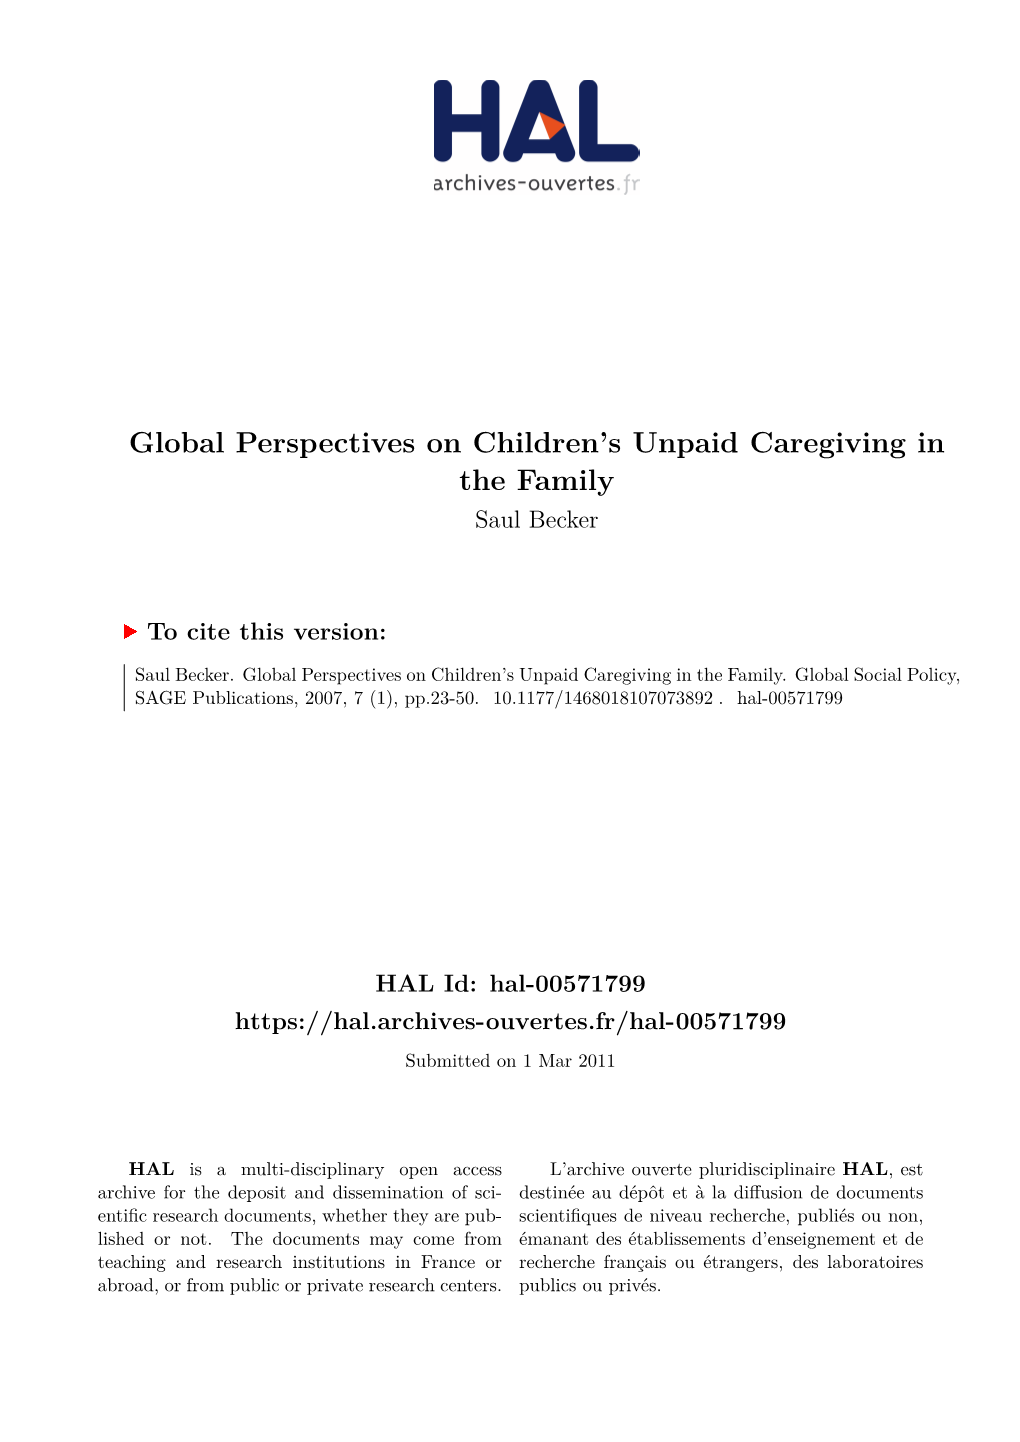 Global Perspectives on Children's Unpaid